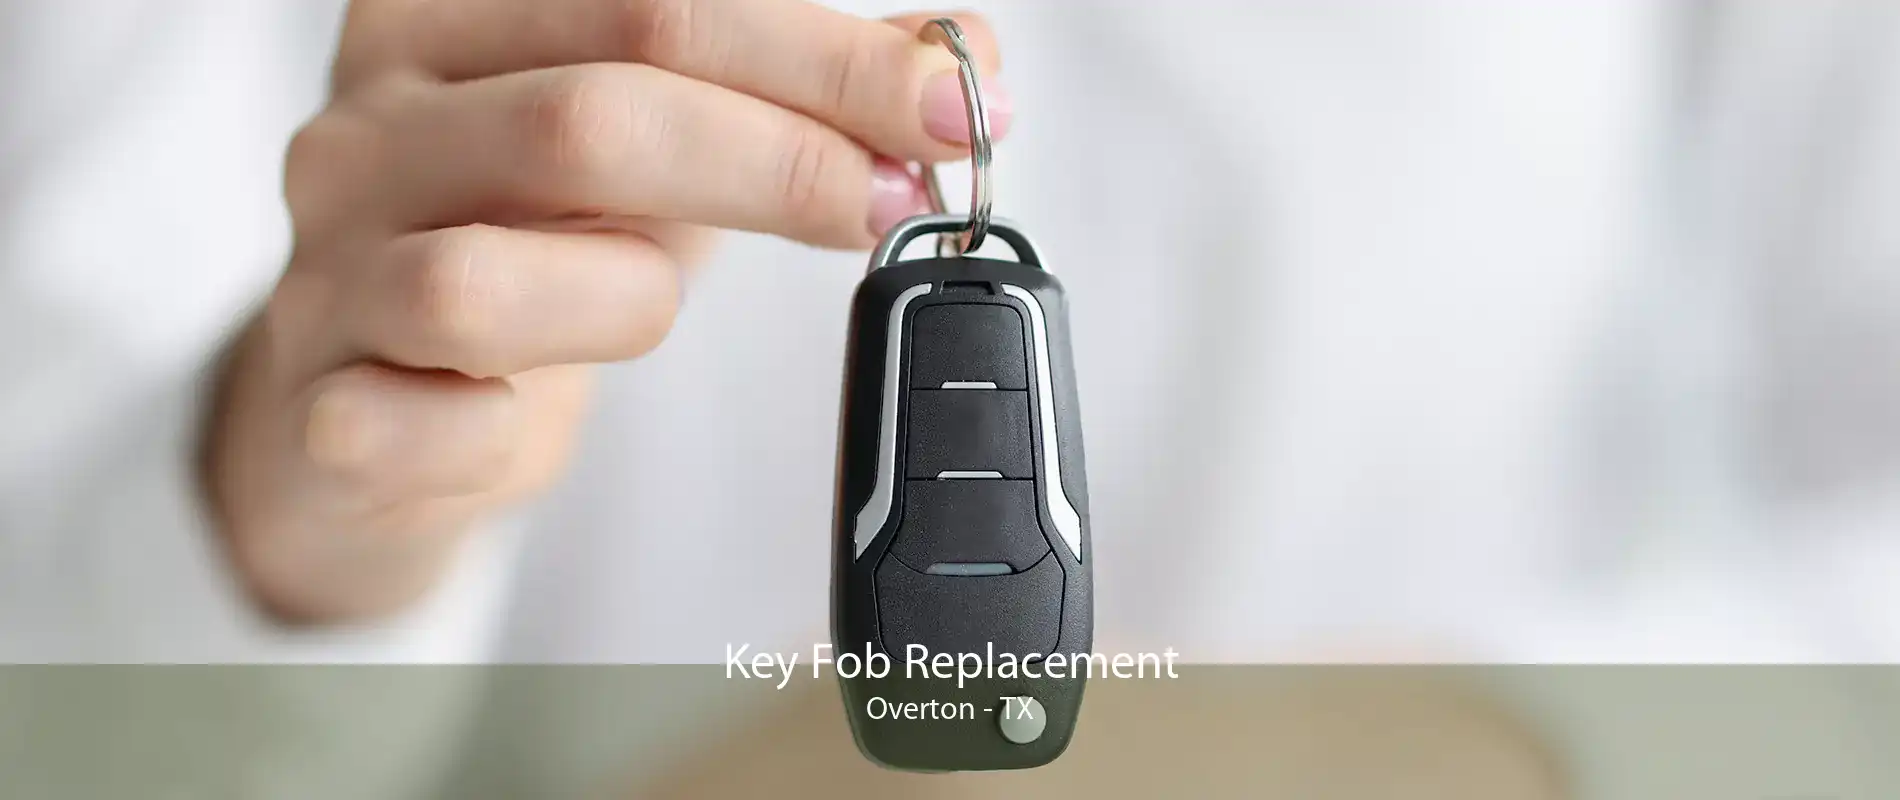 Key Fob Replacement Overton - TX